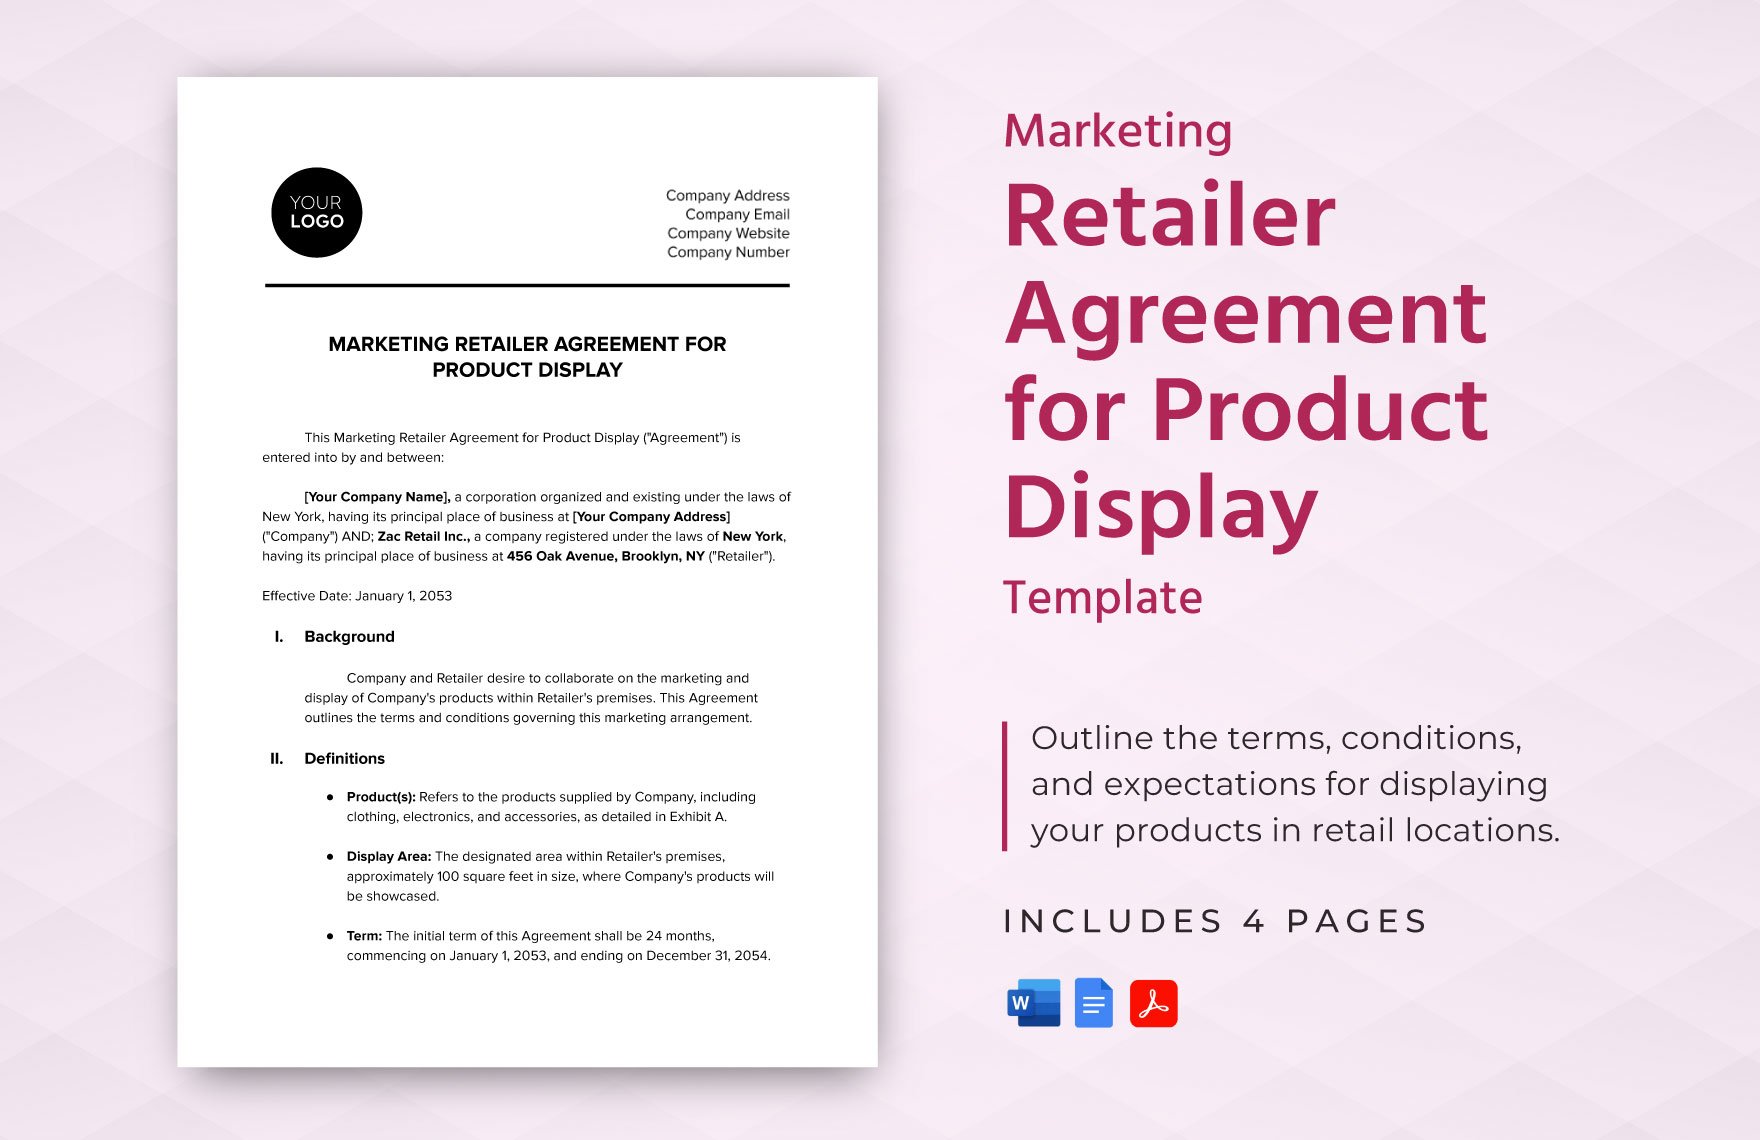 Marketing Retailer Agreement for Product Display Template in PDF Word